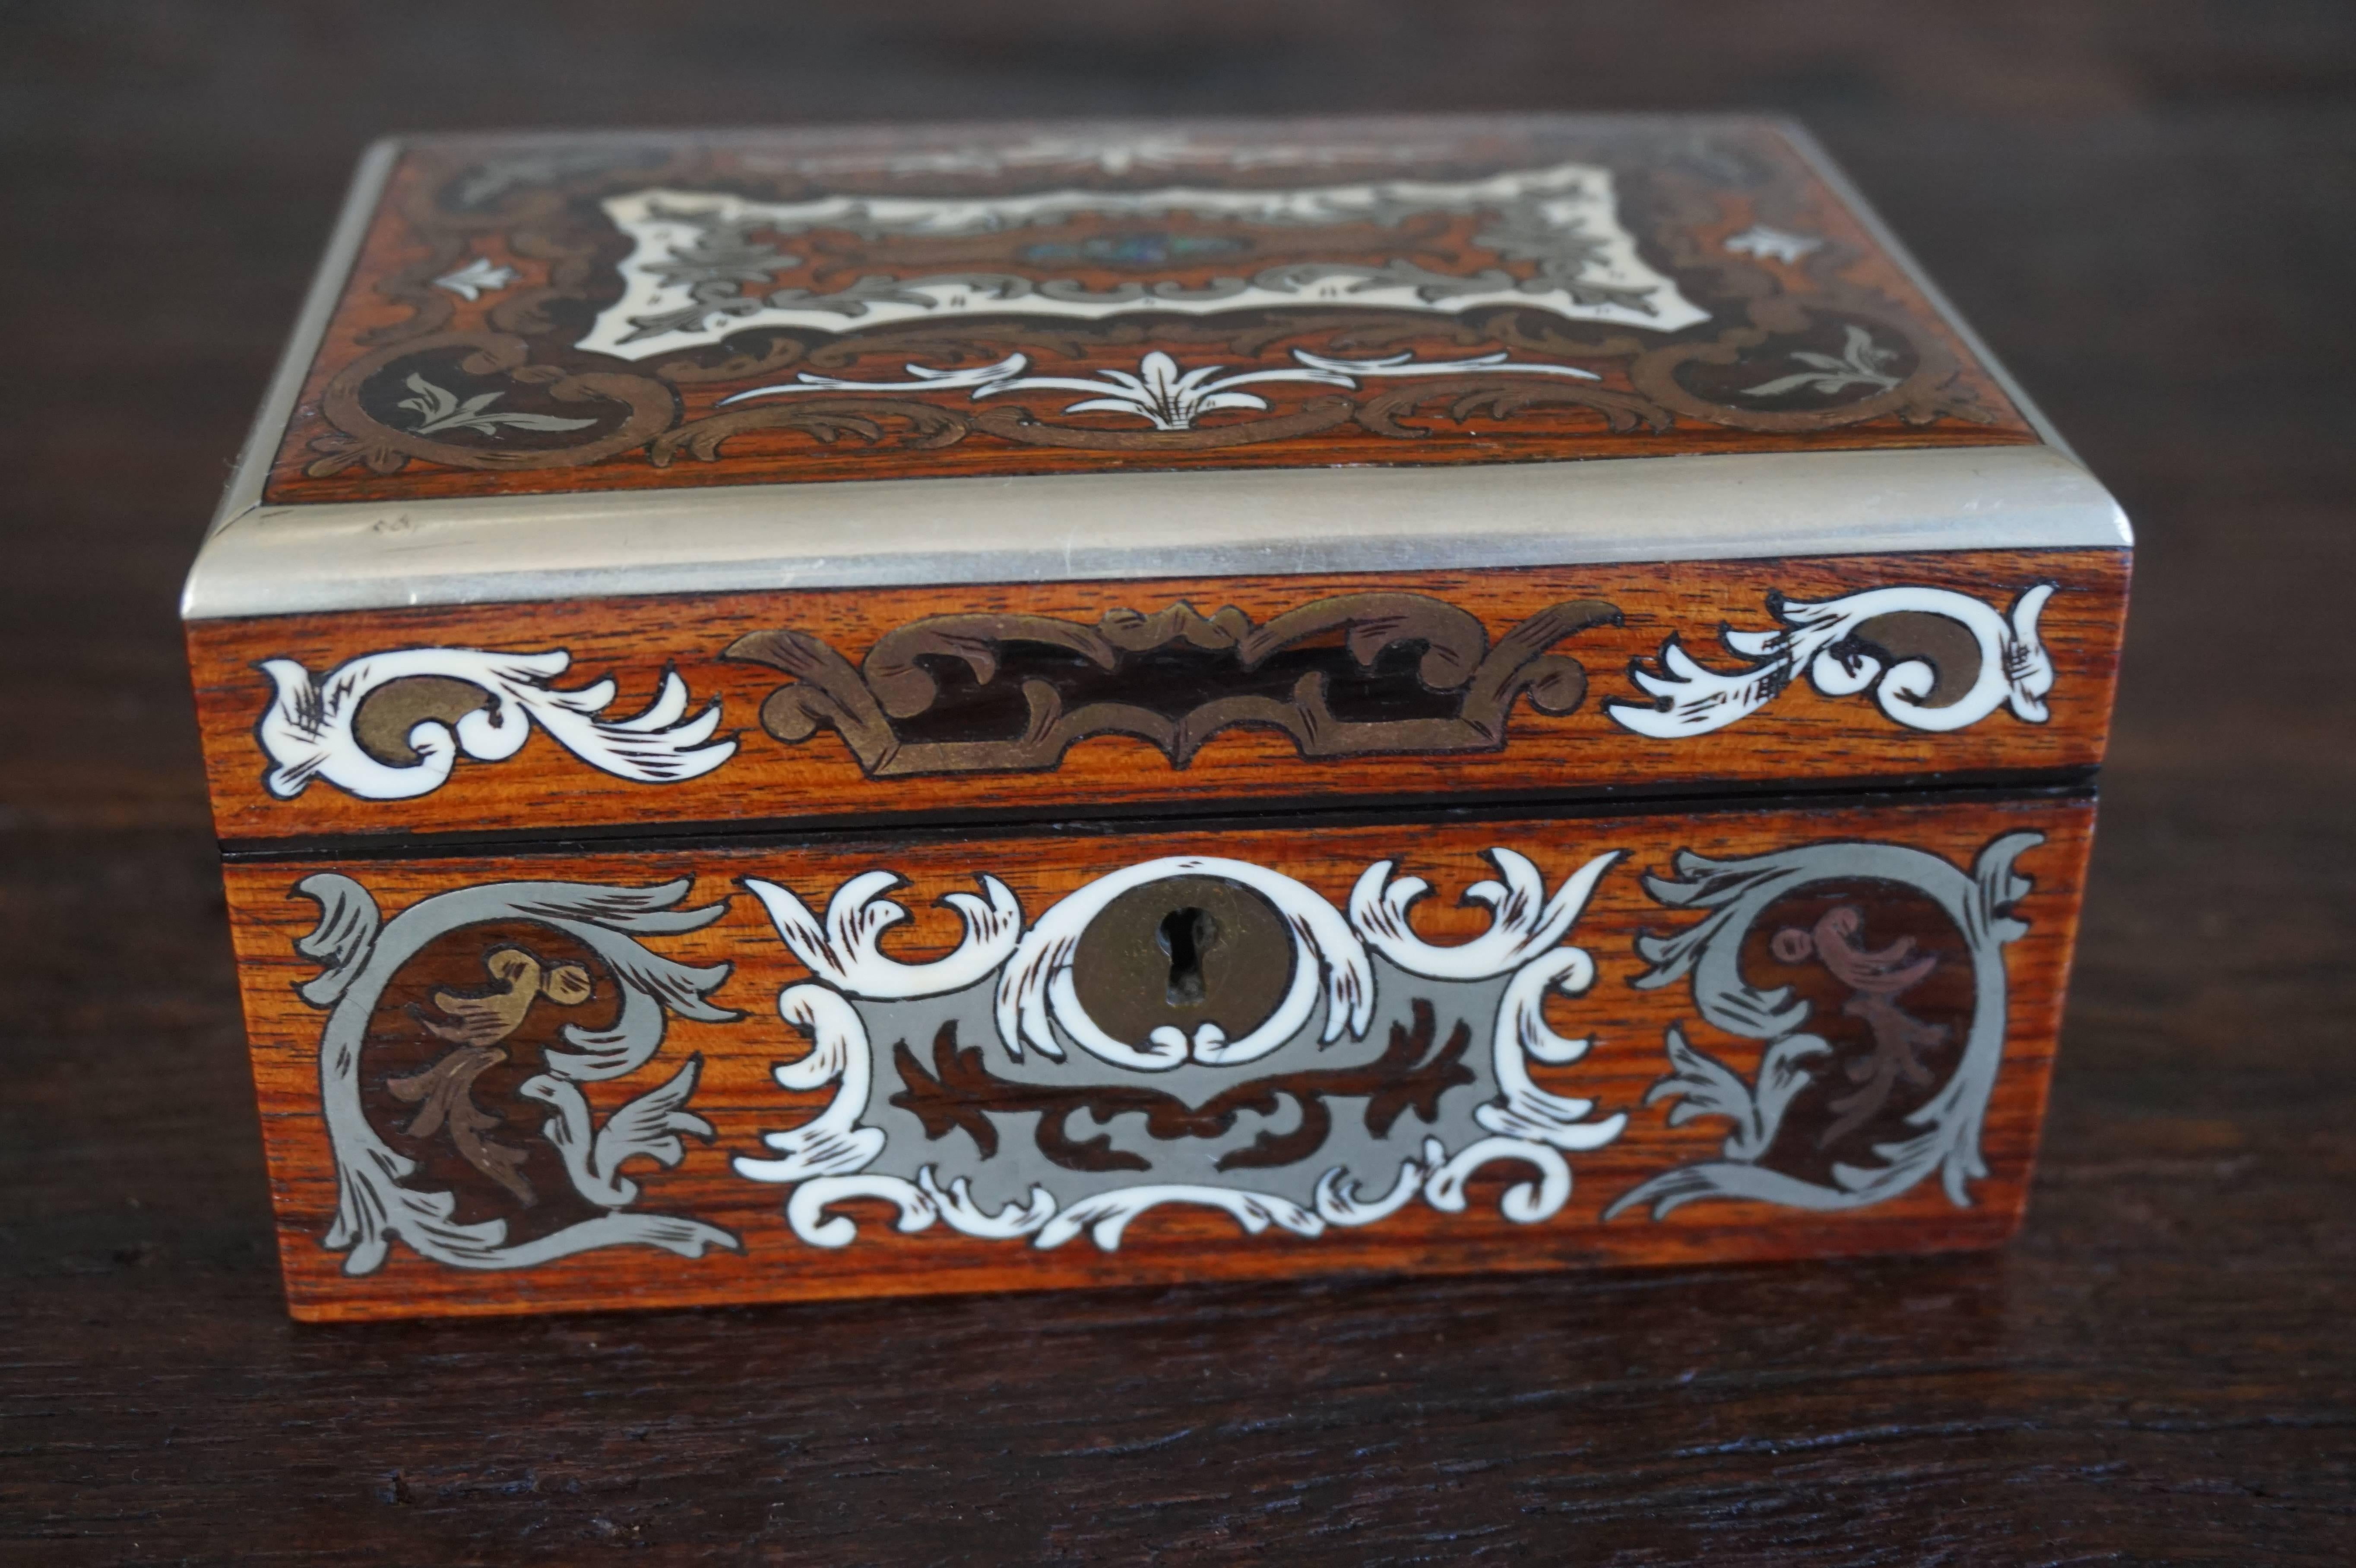 Amazing craftsmanship from the early 1900s.

This handcrafted and one of a kind antique box is a real jaw dropper. This finest of boxes would only be affordable for the wealthiest in society. The materials used and the amount of time it would have